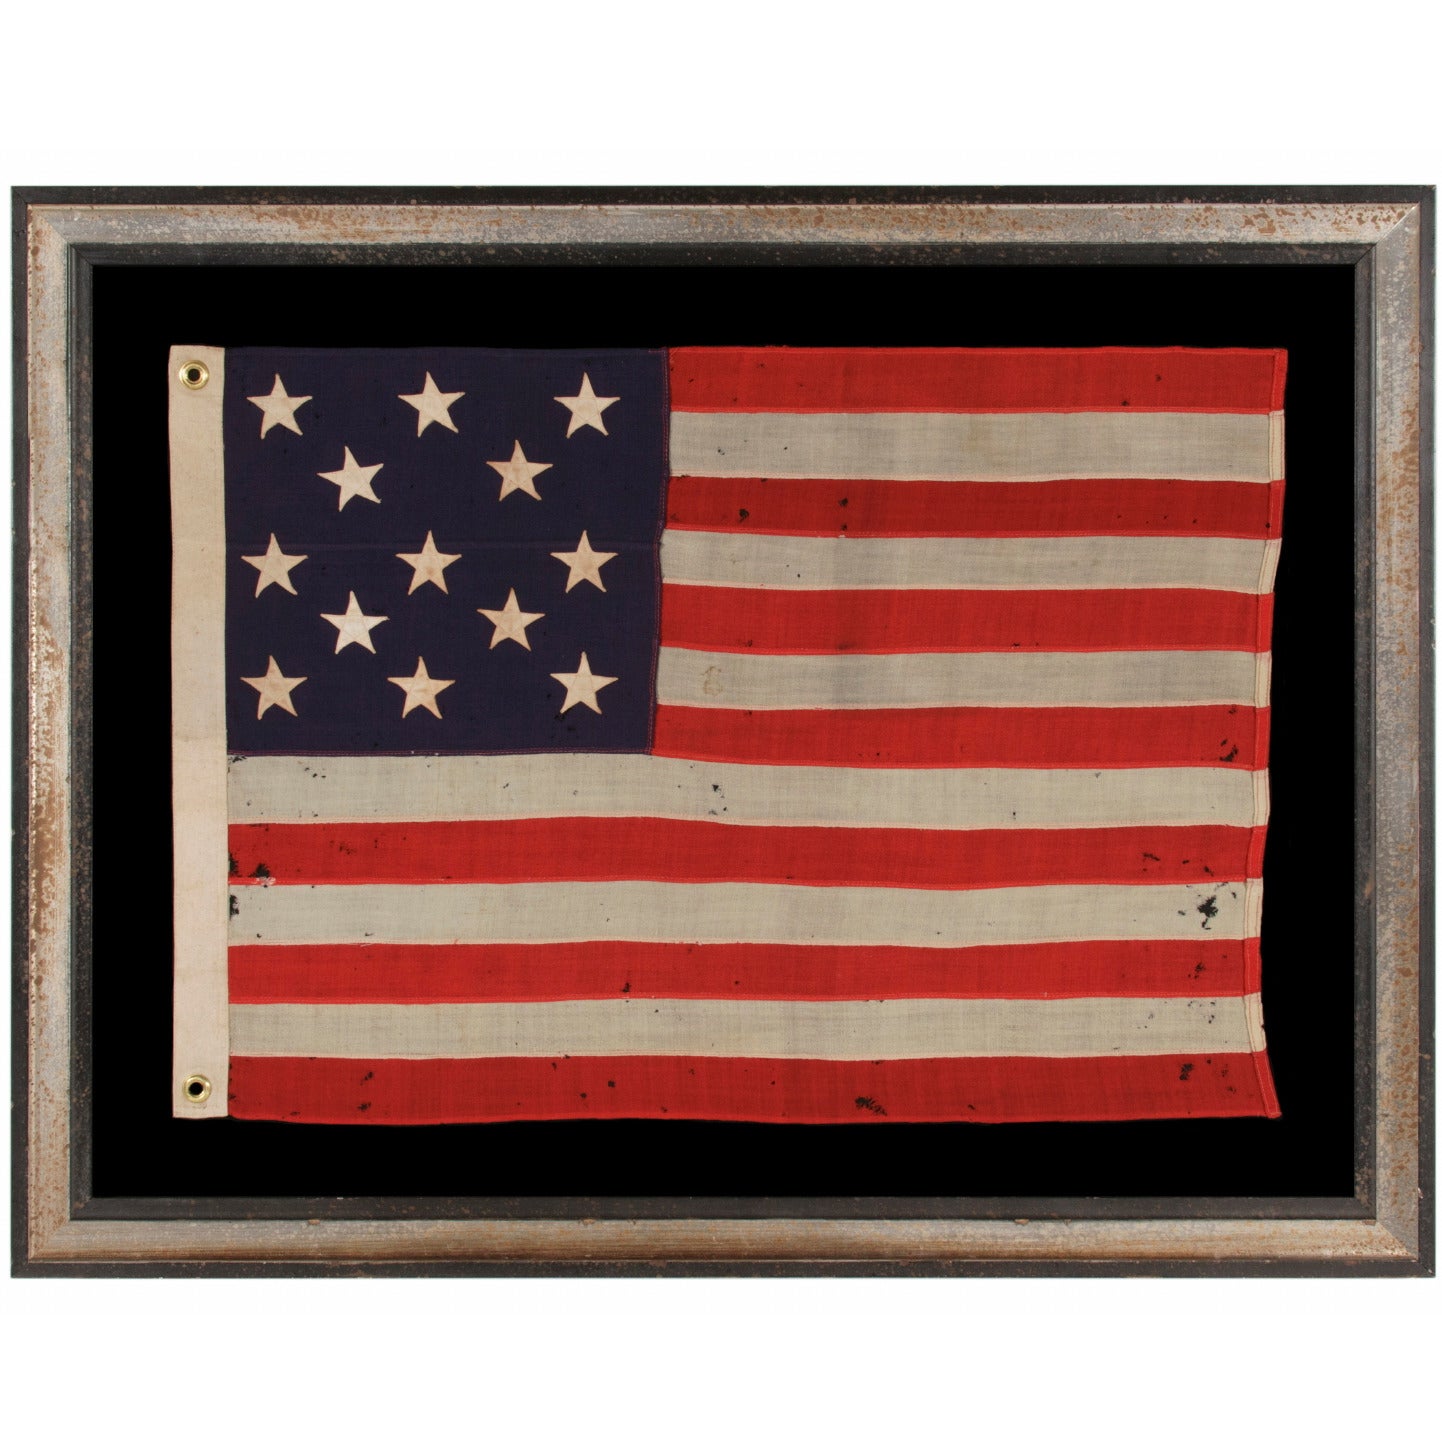 13 Star, Antique American Flag with Stars Arranged in a 3-2-3-2-3 Pattern